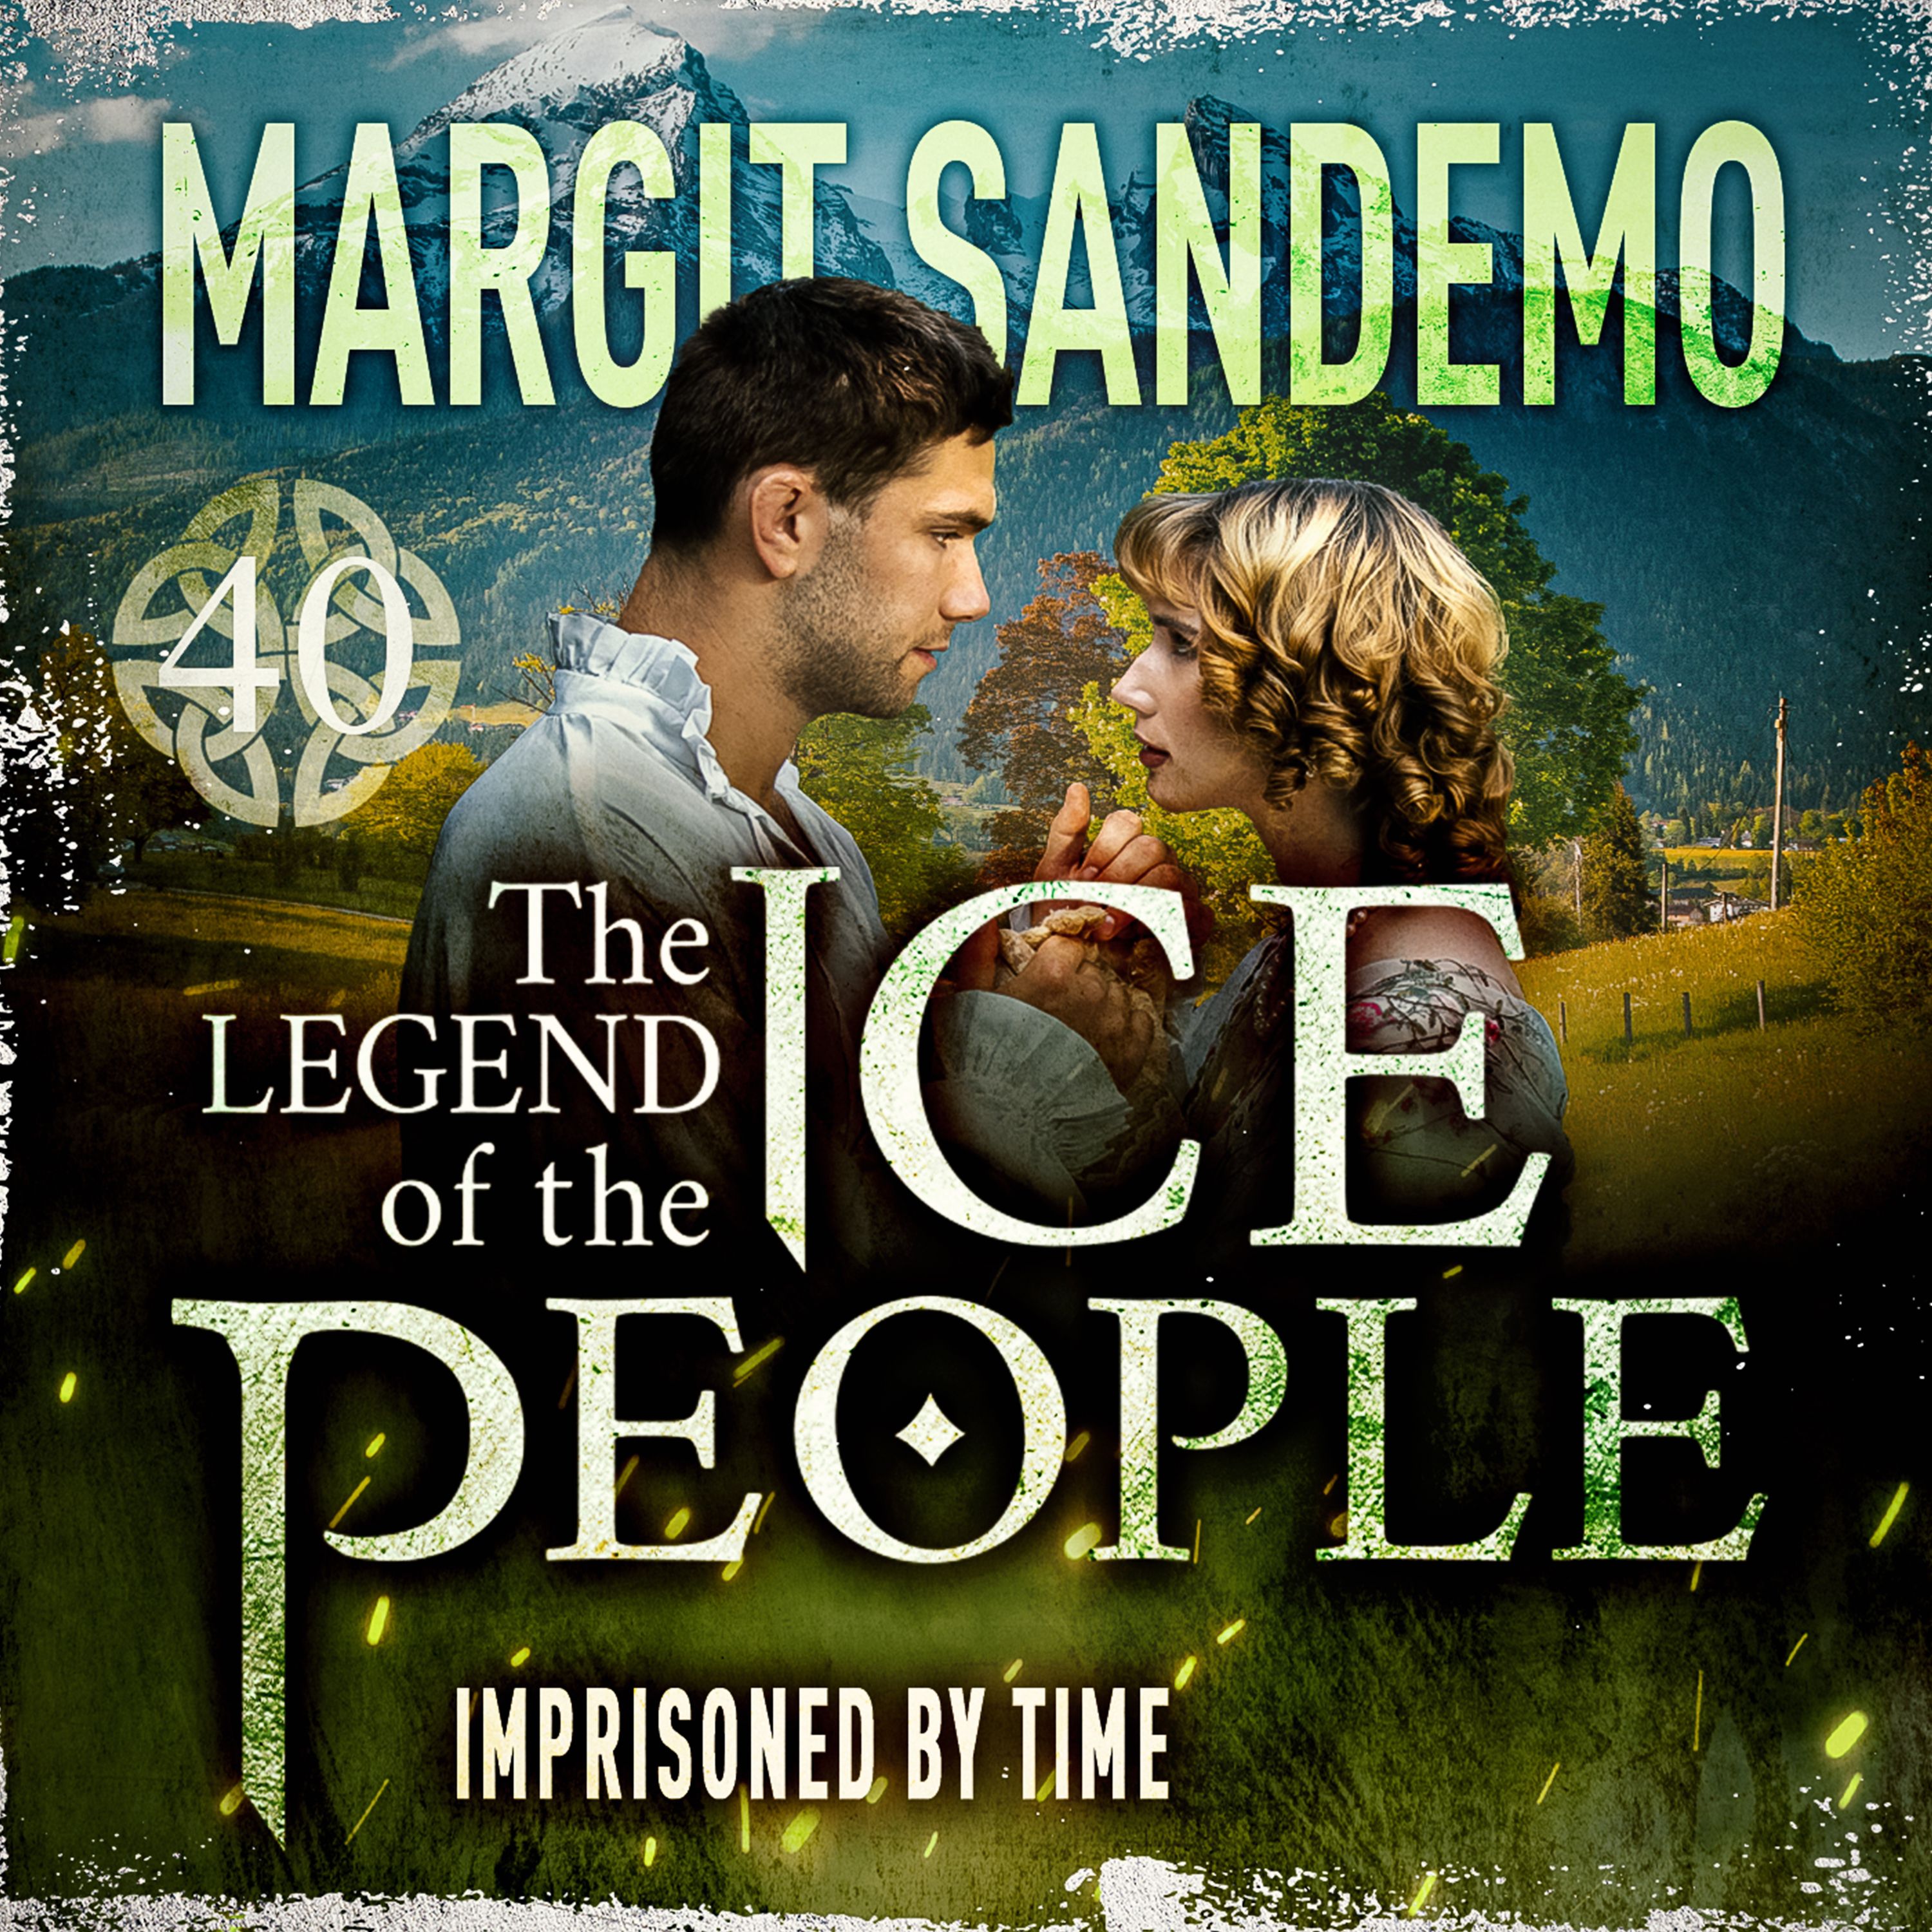 The Ice People 40 - Imprisoned by time, audiobook by Margit Sandemo